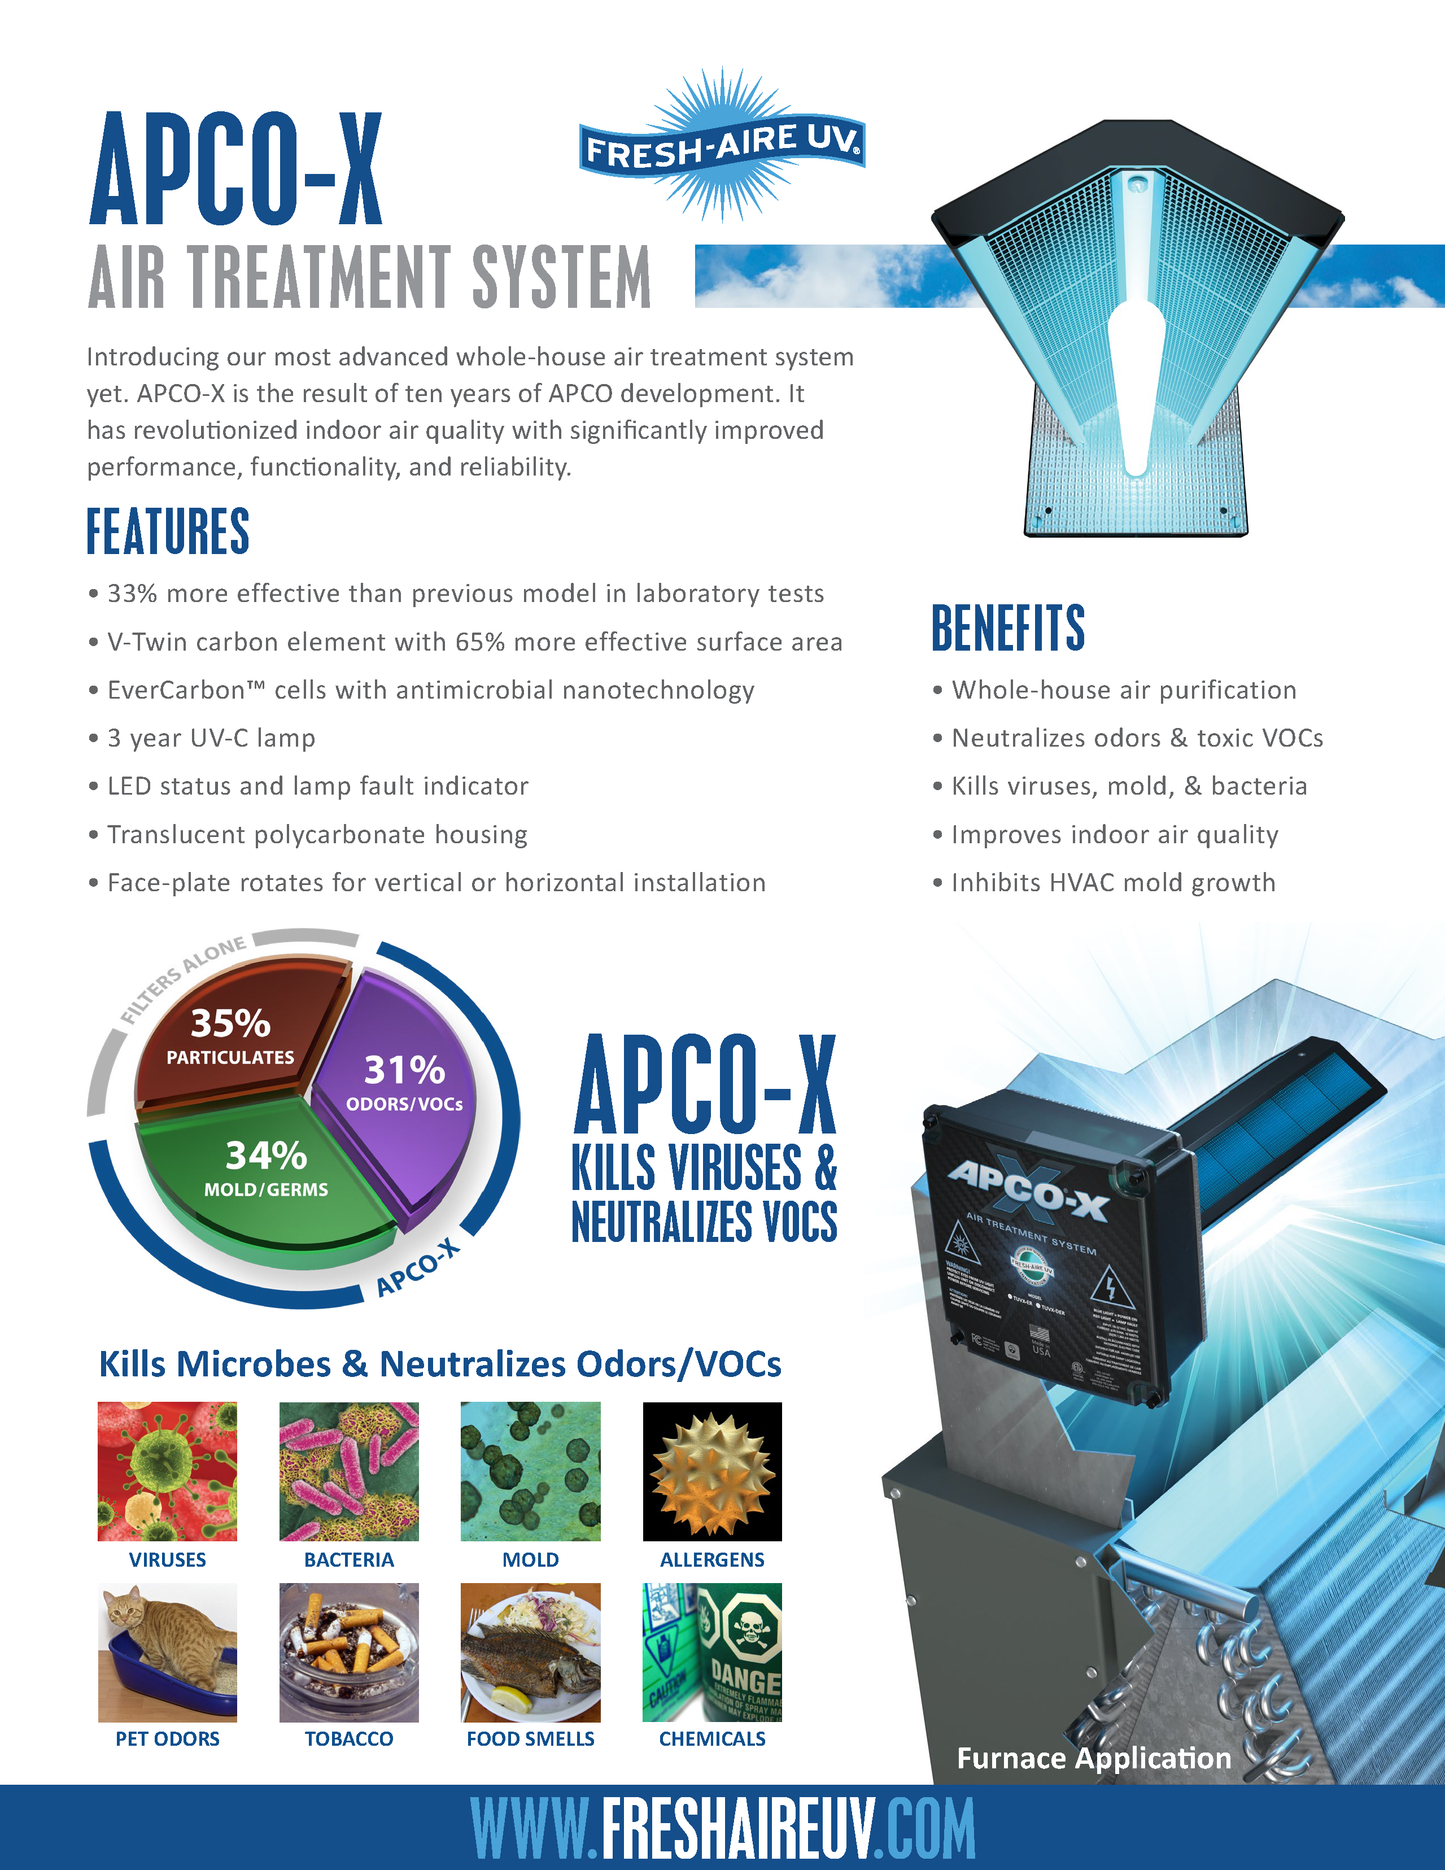 FreshAire TUV-APCOX Family of Products HVAC Contractors ONLY Page 1